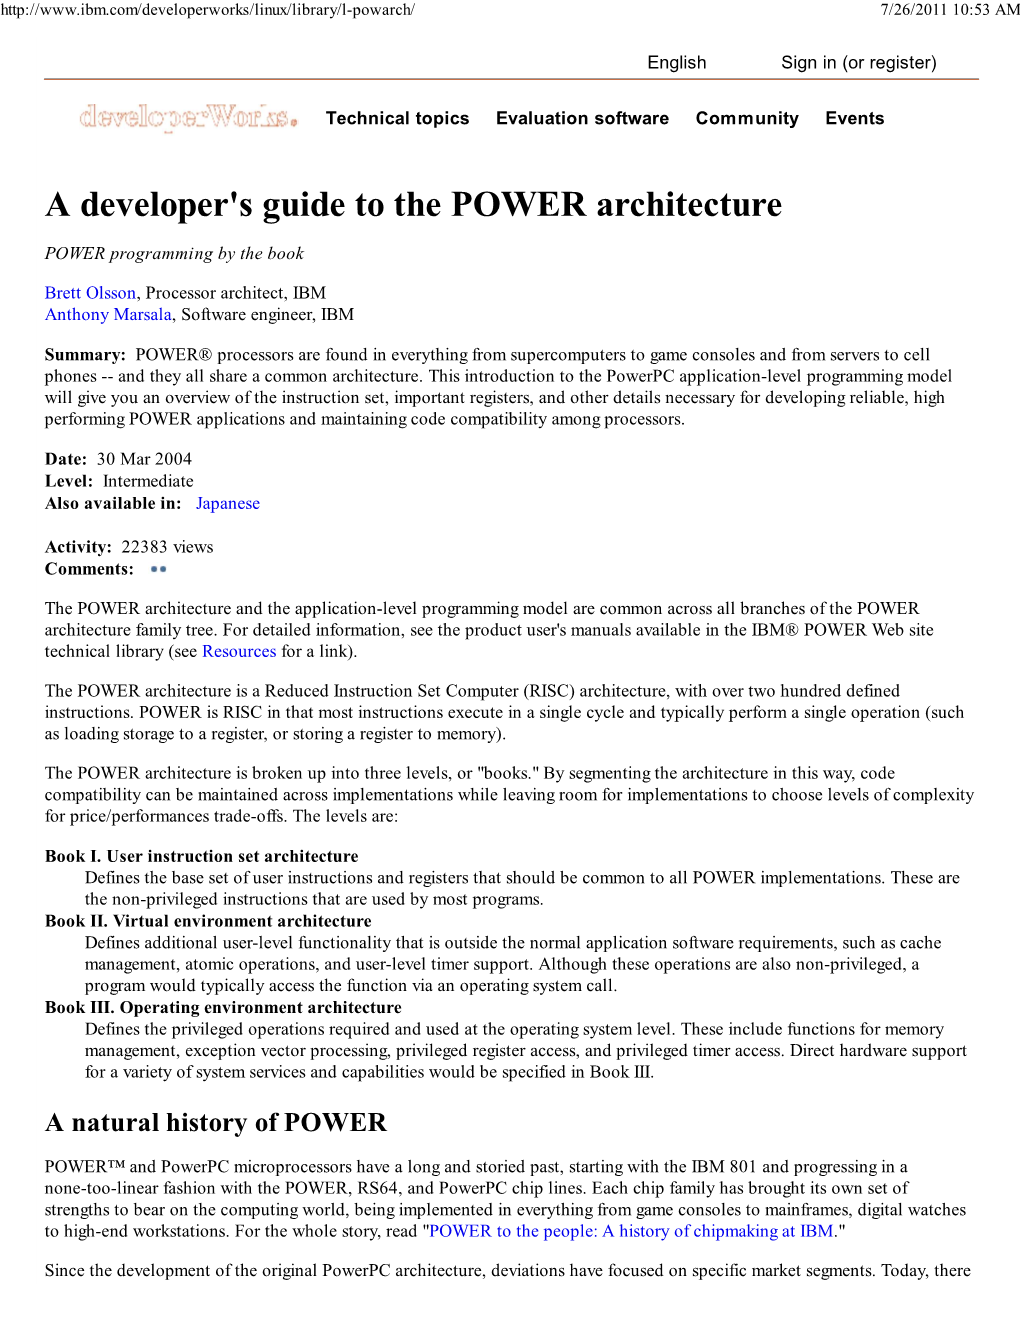 A Developer's Guide to the POWER Architecture